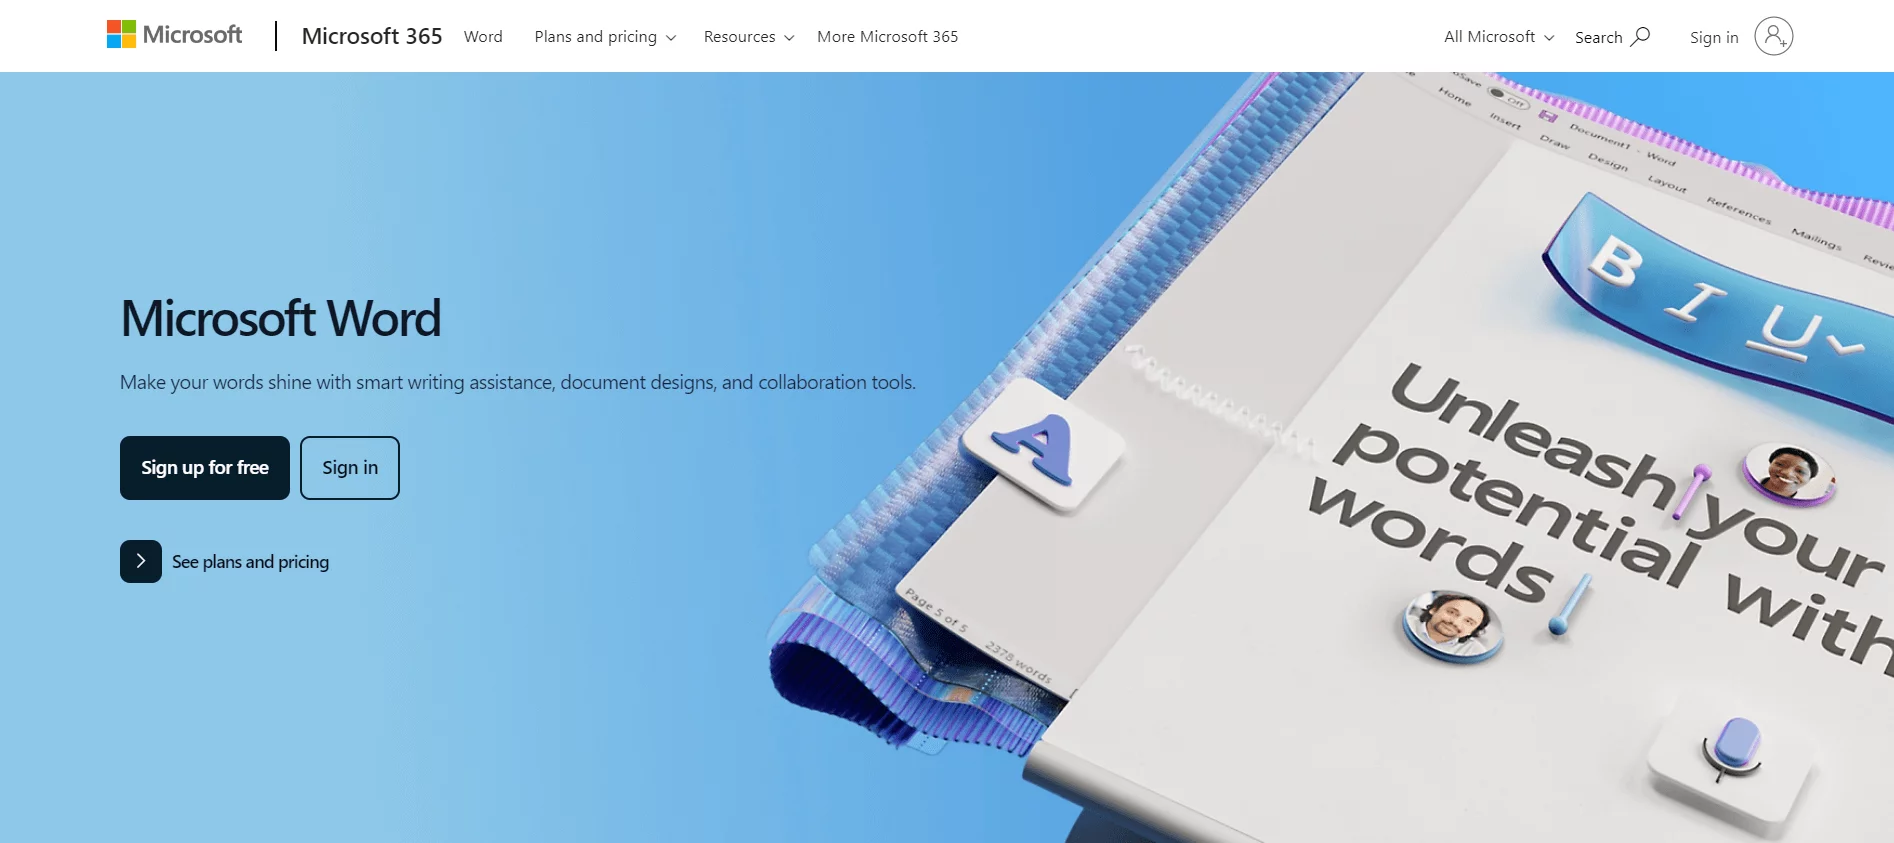 Microsoft Word homepage promoting writing assistance, document designs, and collaboration tools with options to sign up or see pricing.